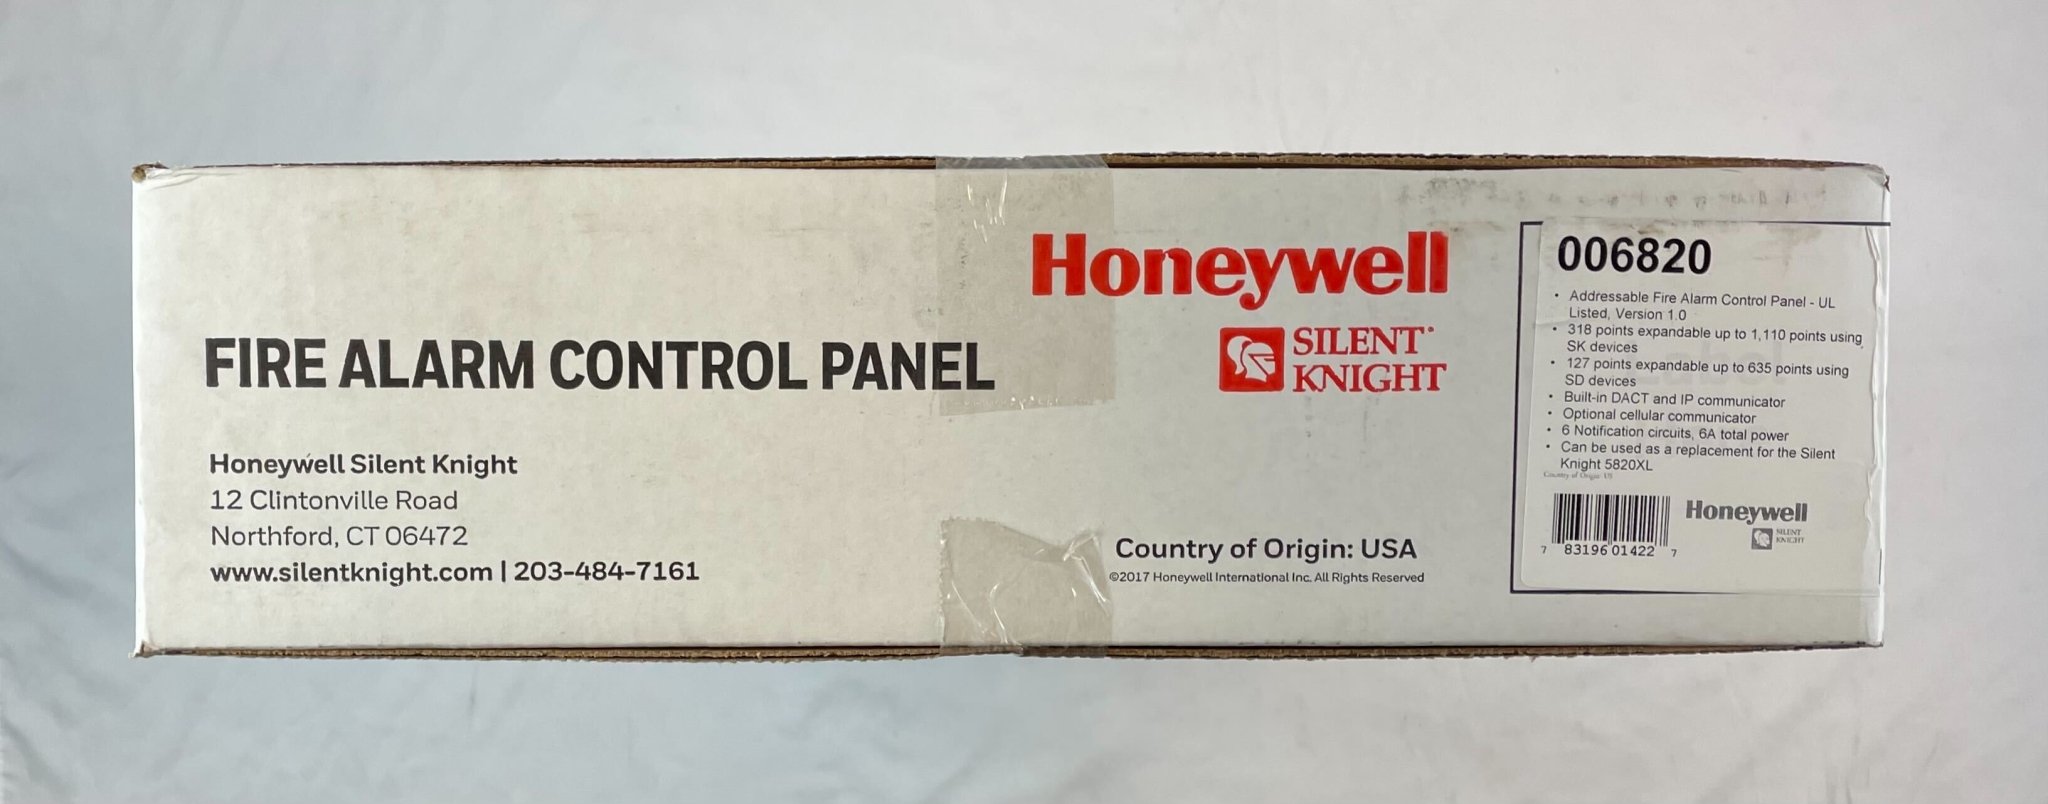 Silent Knight 6820 1110-Point Addressable Fire Alarm Control Panel - The Fire Alarm Supplier